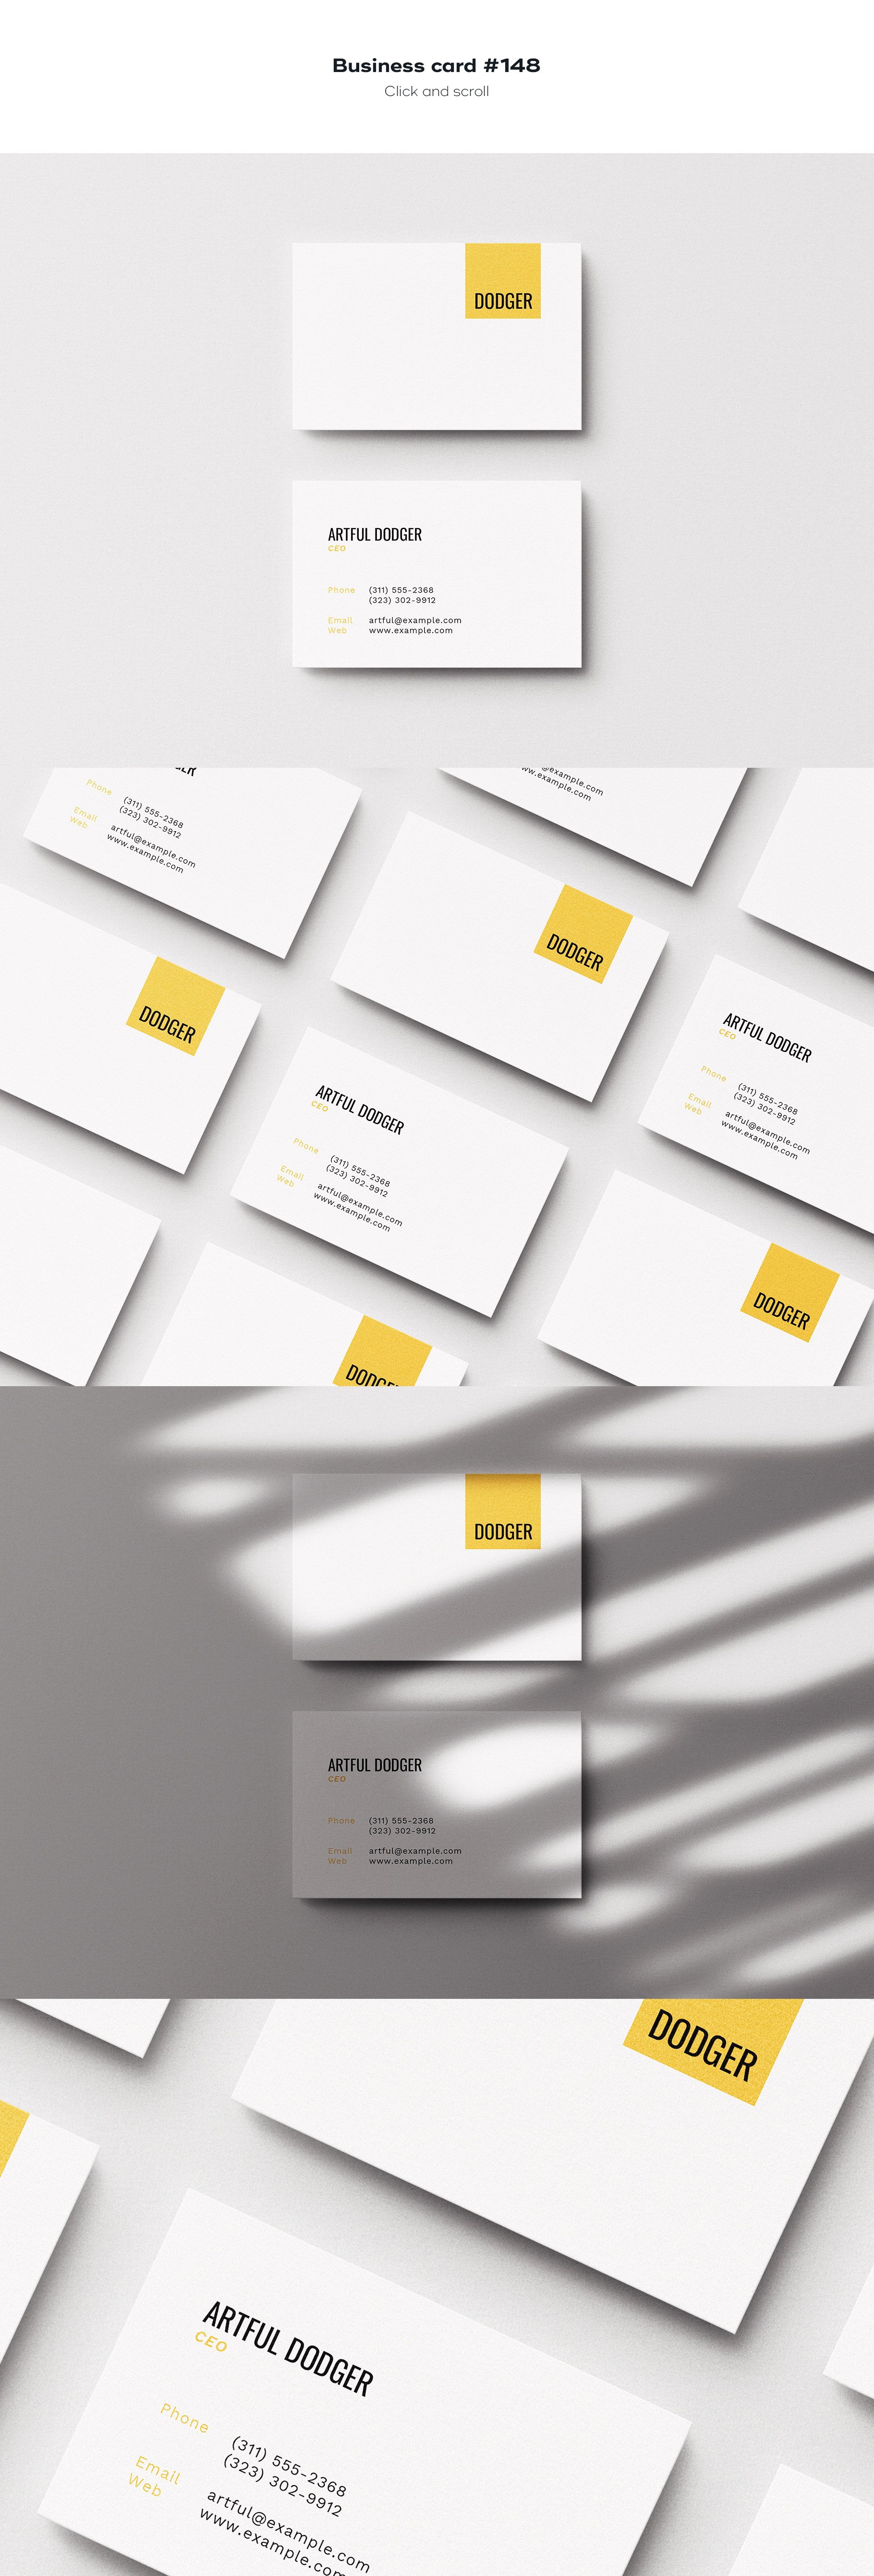 business card 148 458